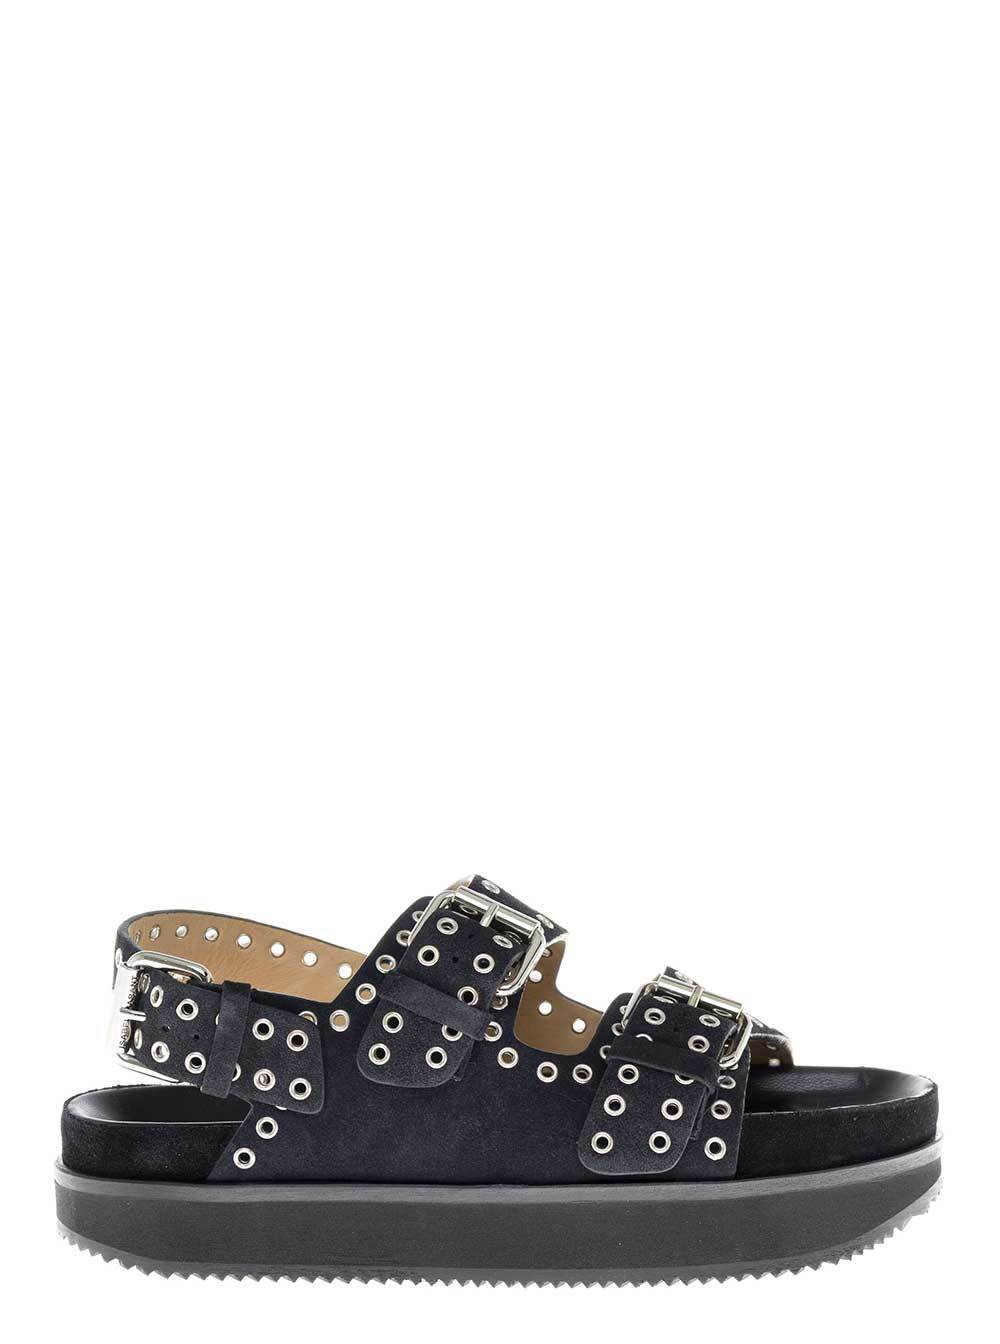 Isabel Marant Ophie Suede Leather Sandals With Studs in black